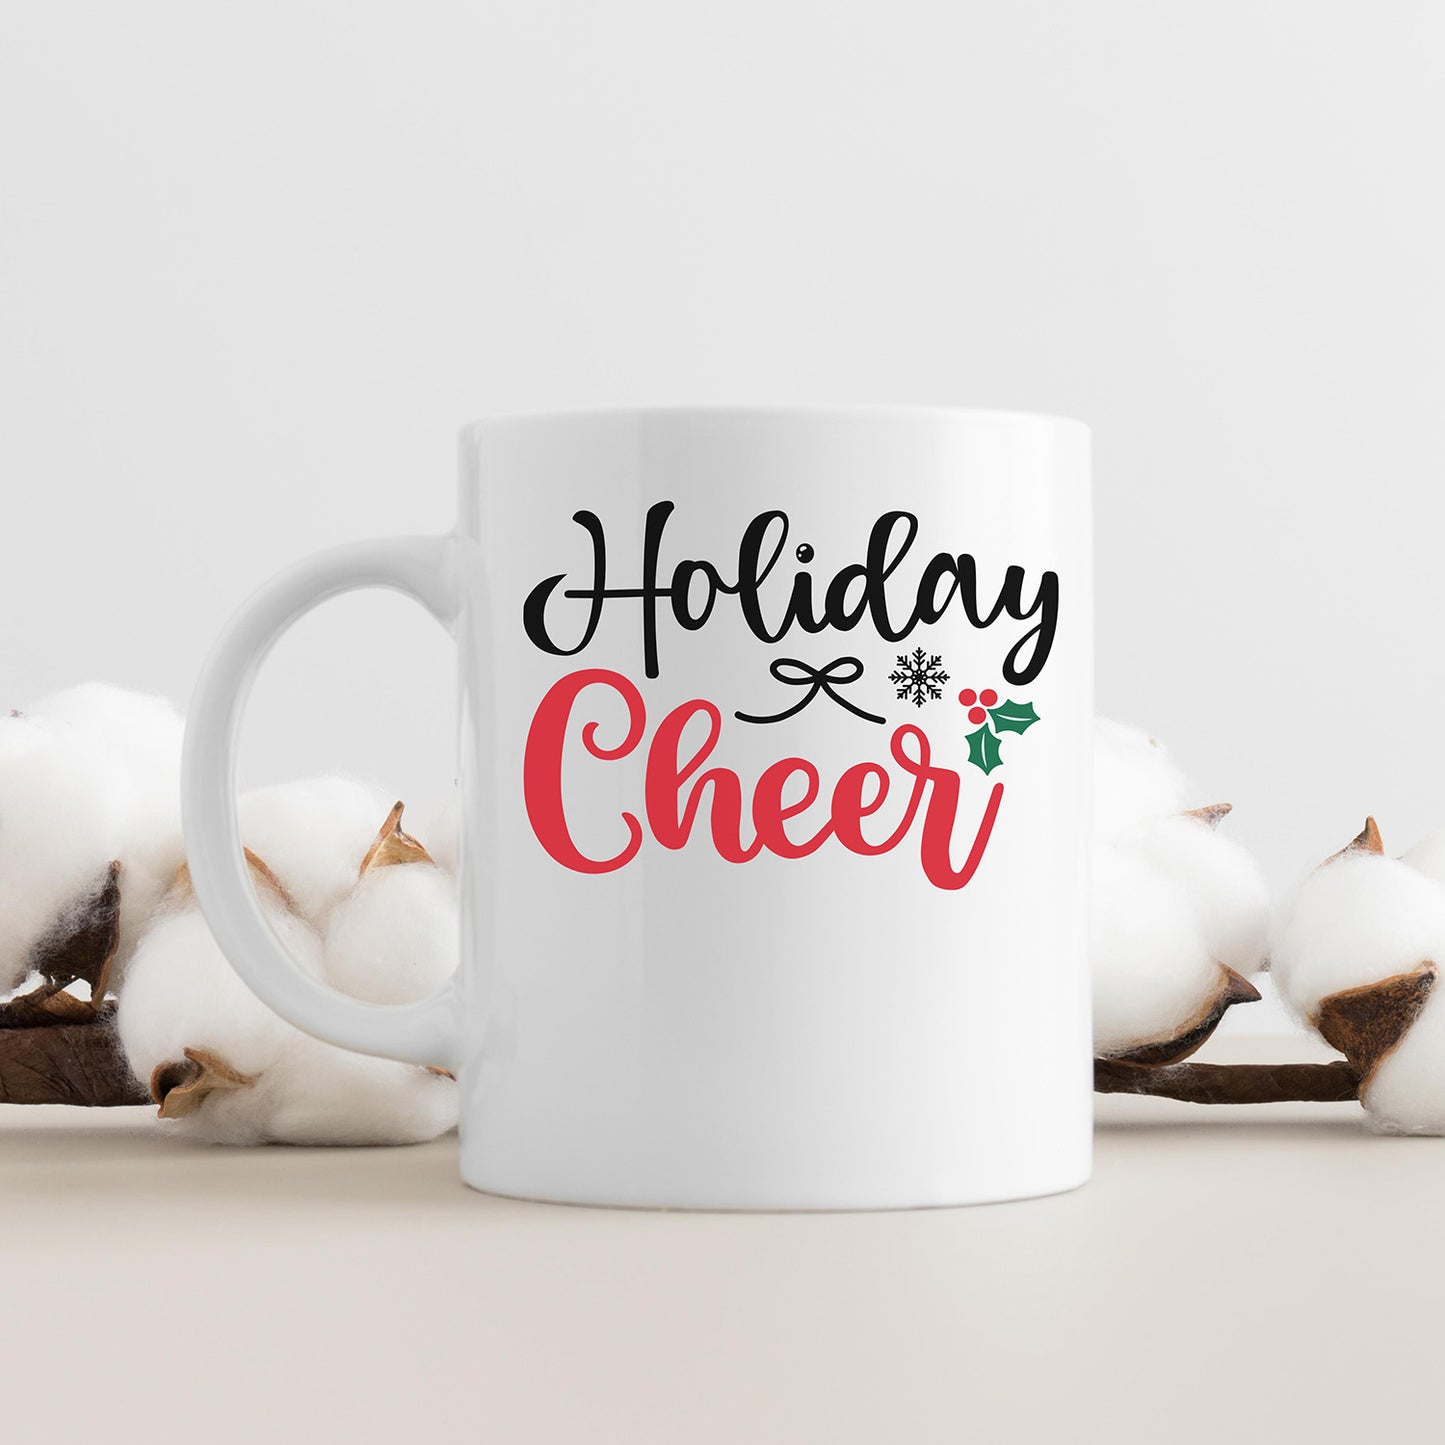 "Holiday Cheer" Graphic